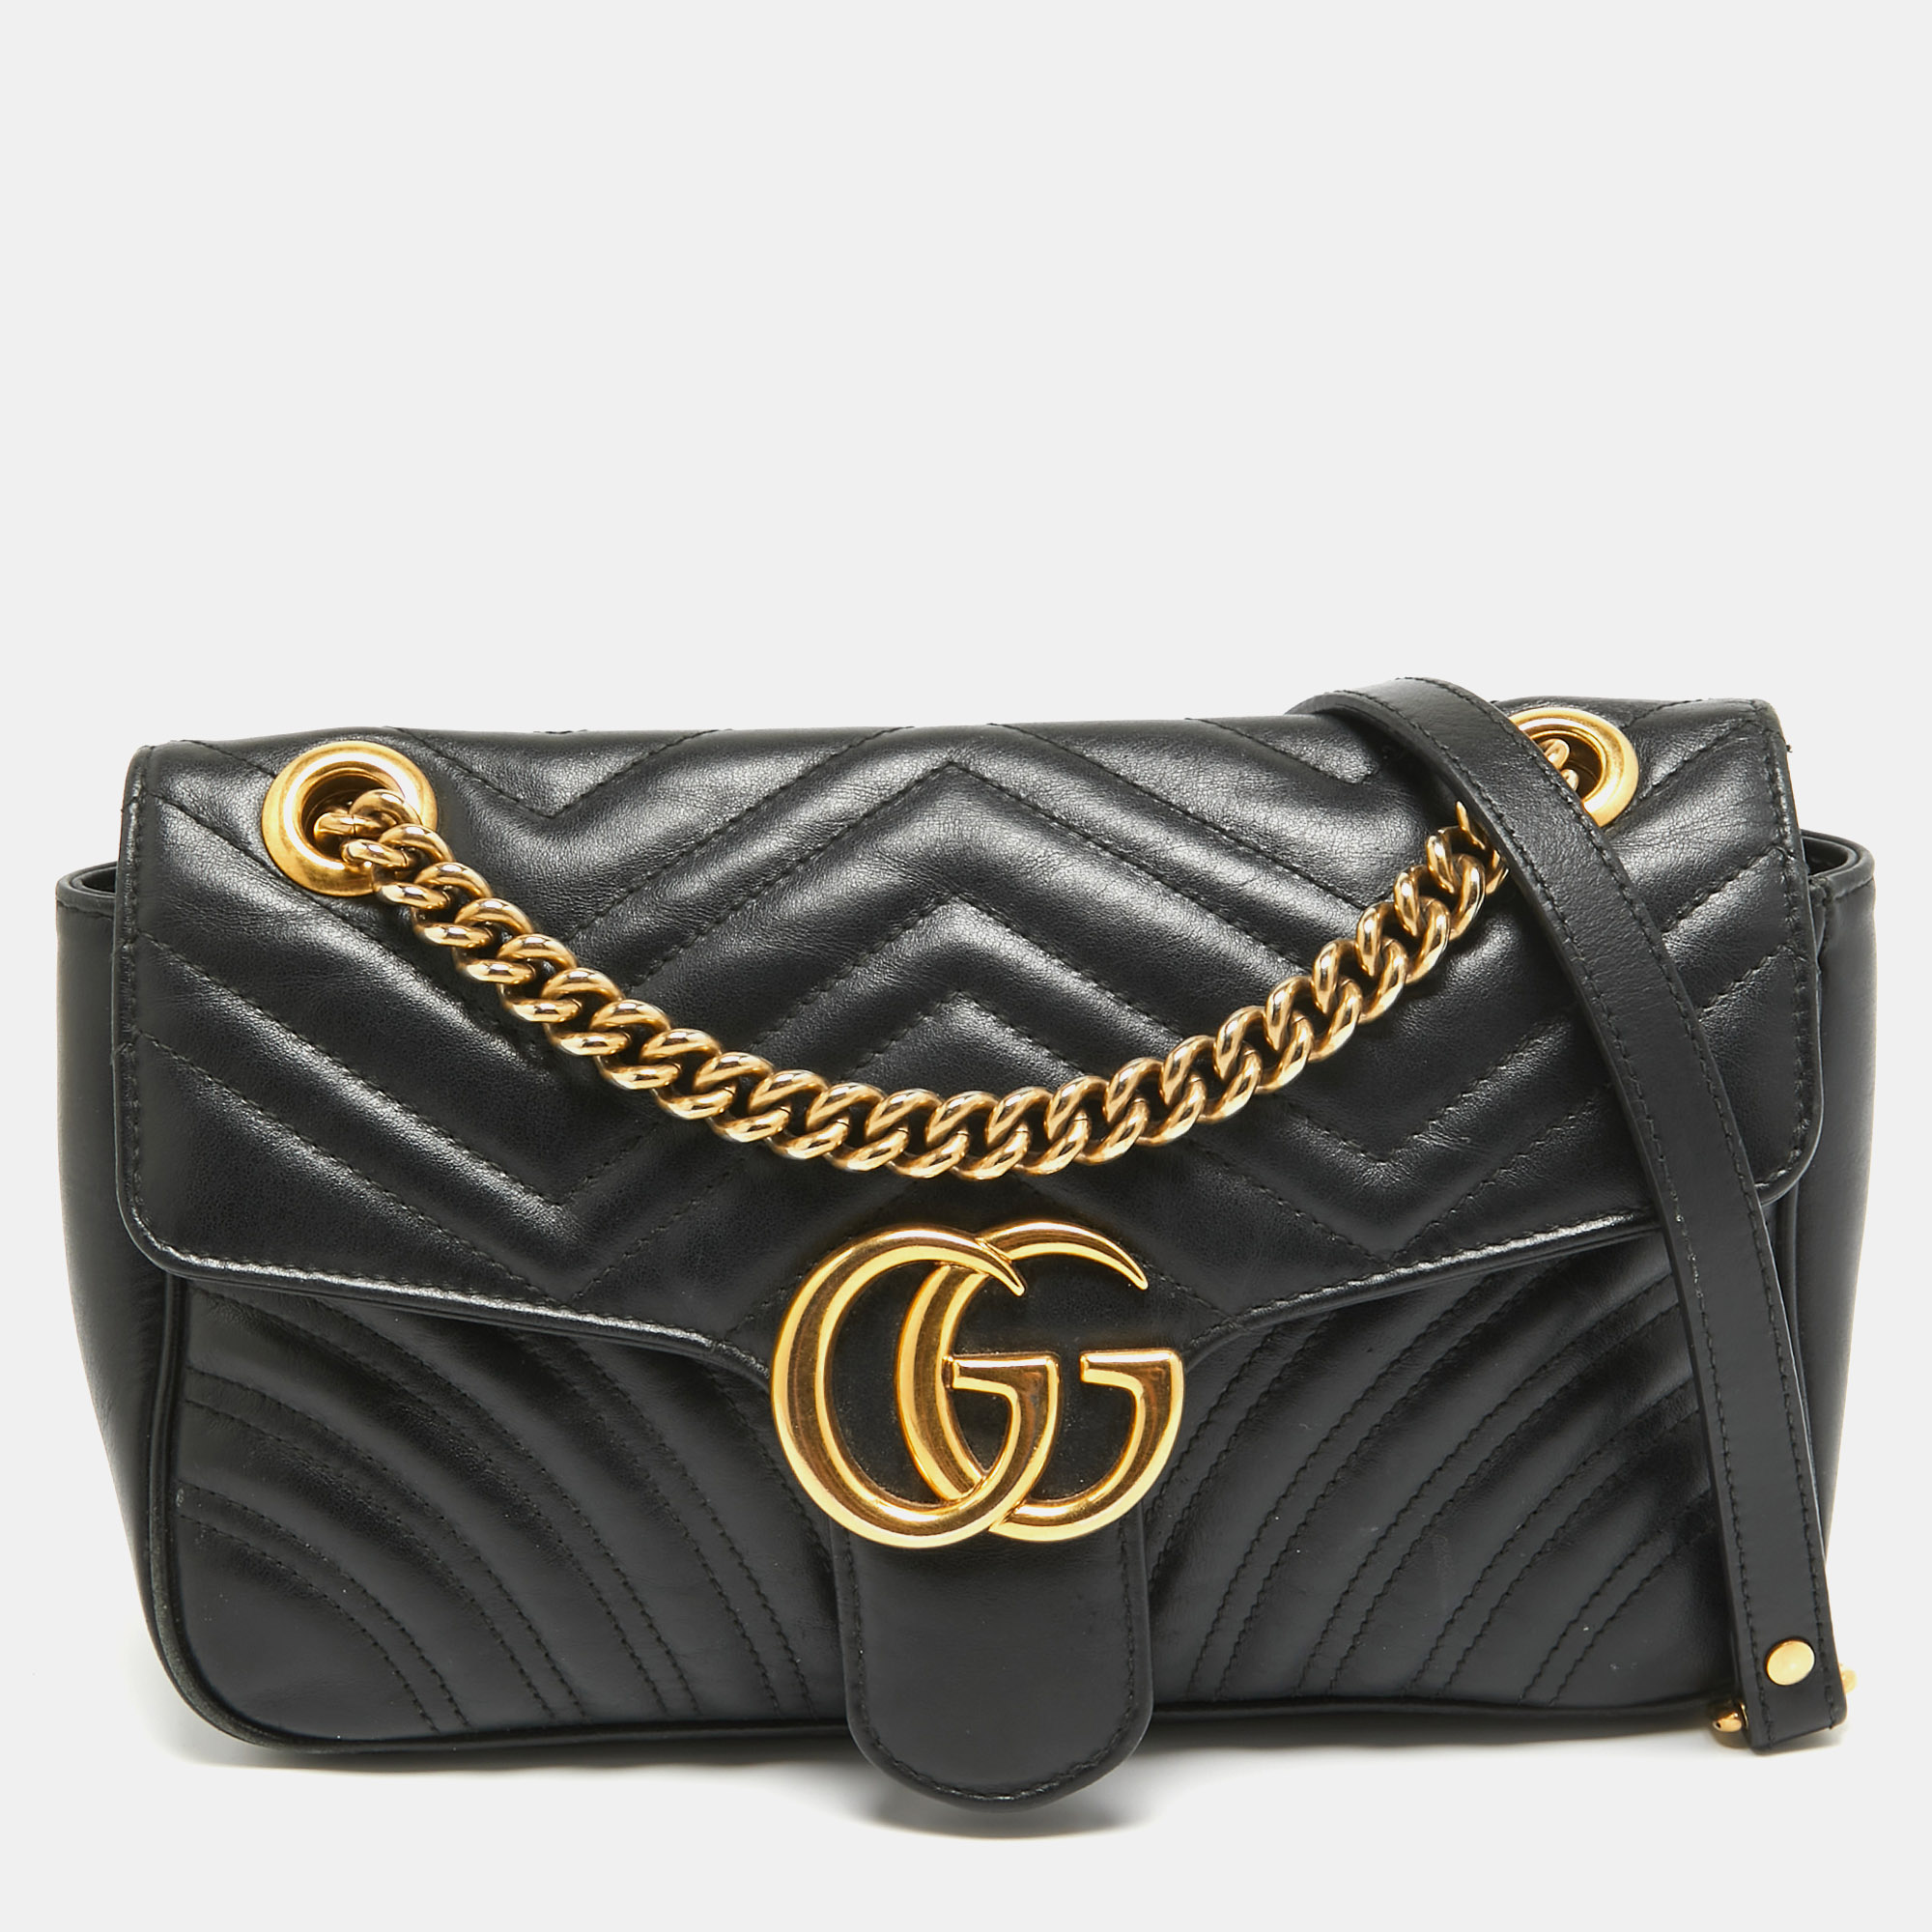 Innovative and sophisticated this Gucci Marmont bag evokes a sense of classic glamour. Finely crafted from matelassé leather it gets a luxe update with a GG motif on the front and features an Alcantara lined interior. The chain leather shoulder strap enables you to carry it in a stylish way and the gold tone accents make it undeniably chic.